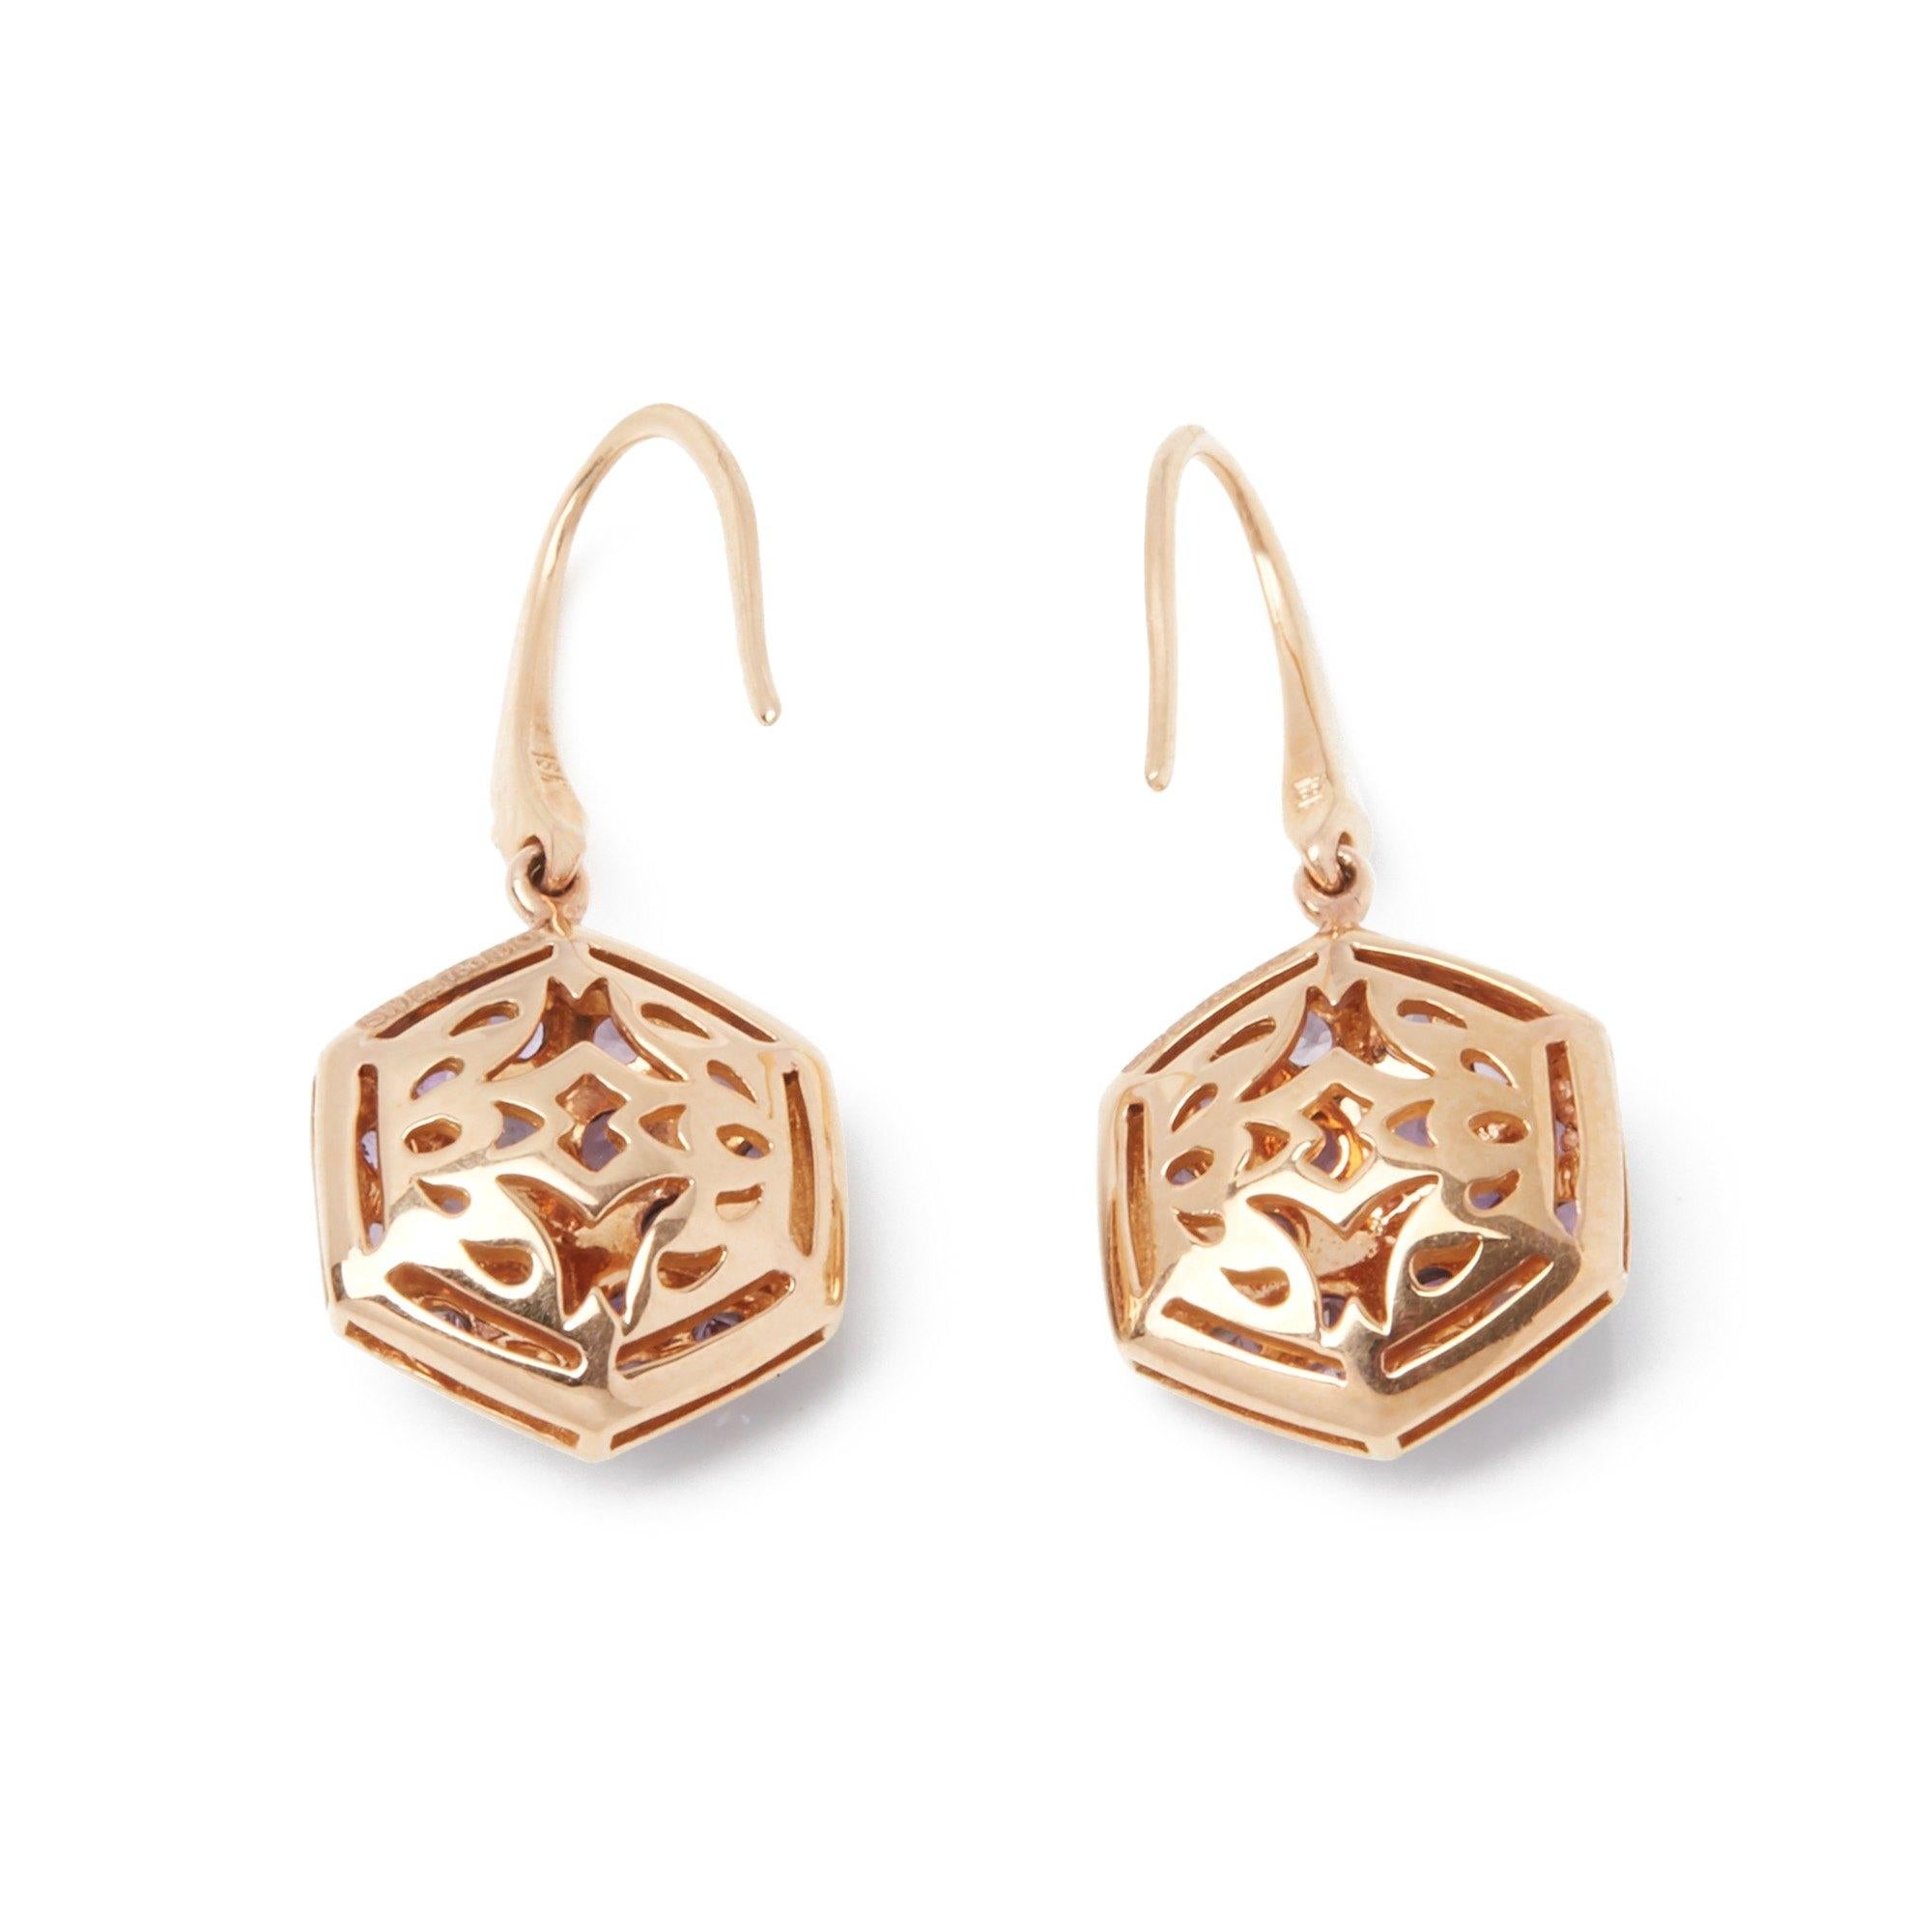 These Earrings by Stephen Webster are from his Deco Collection and features Two, Six Pave Round Amethyst set sections with a total of Thirty Eight stones forming a Hexagonal shape. Set in 18k Rose Gold with Articulated Leverback Earclips. 